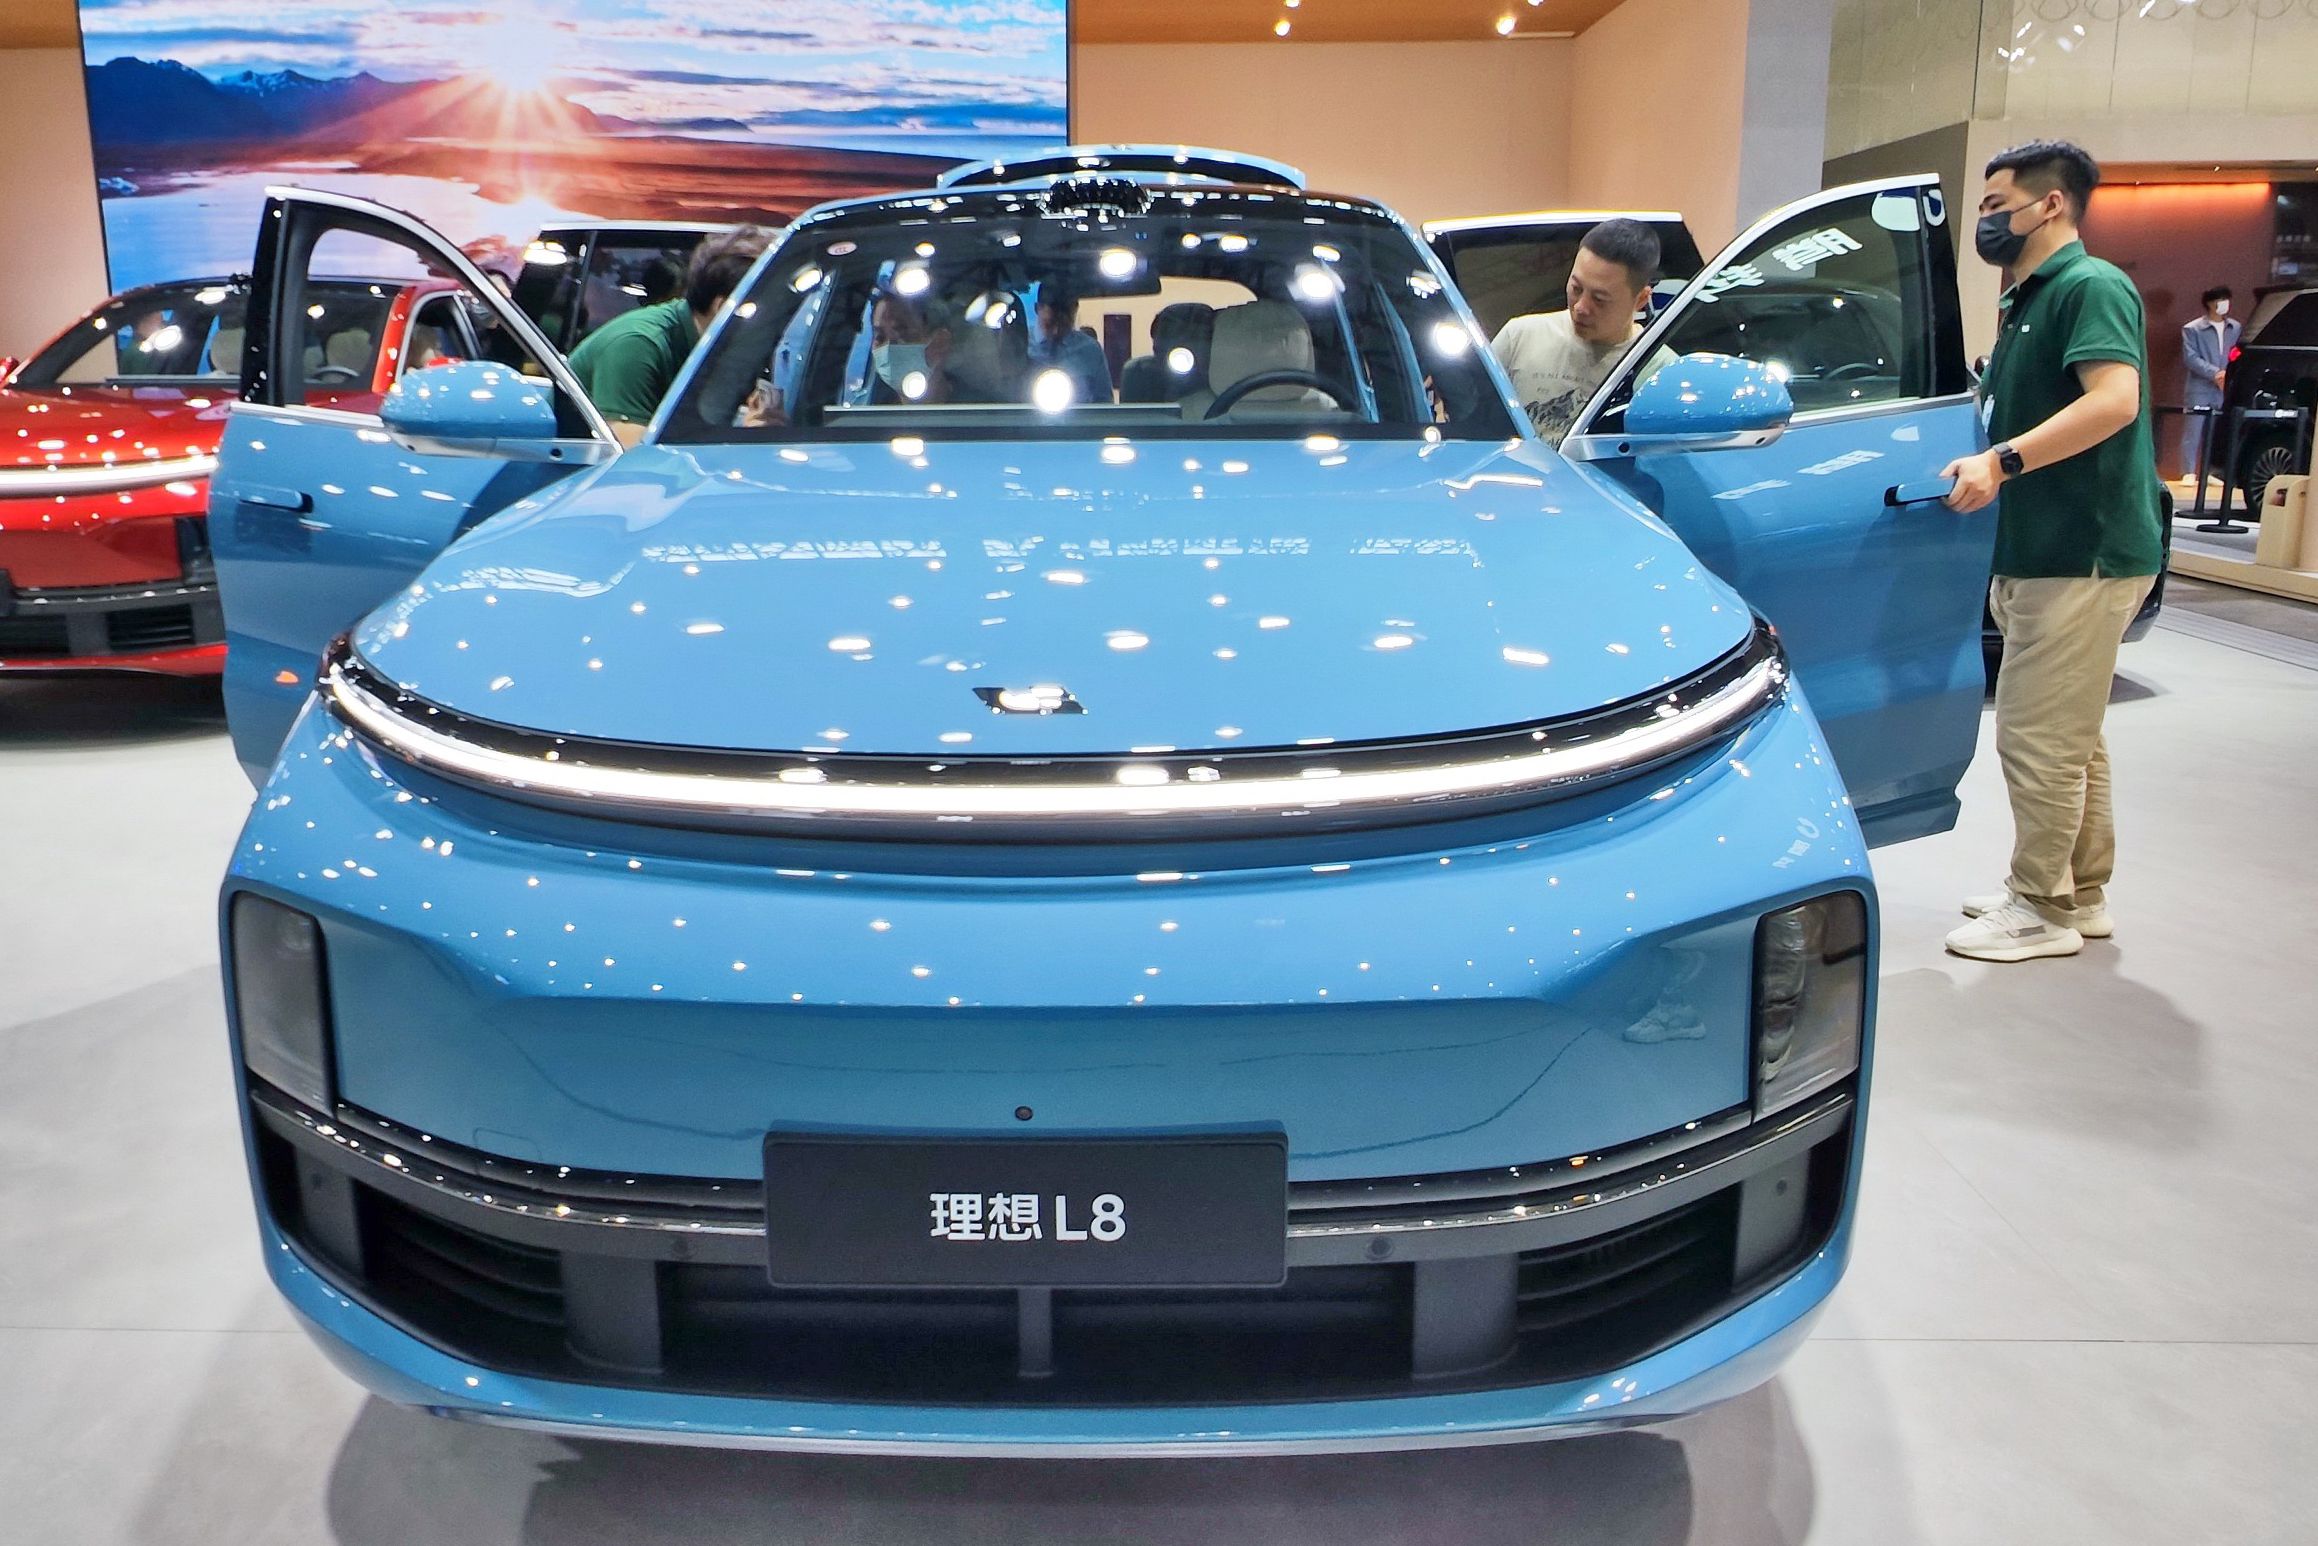 Li Auto’s Sales Surge 146% in May to Beat Hozon Auto, Leap Motor; BYD Remains Top Chinese NEV Seller